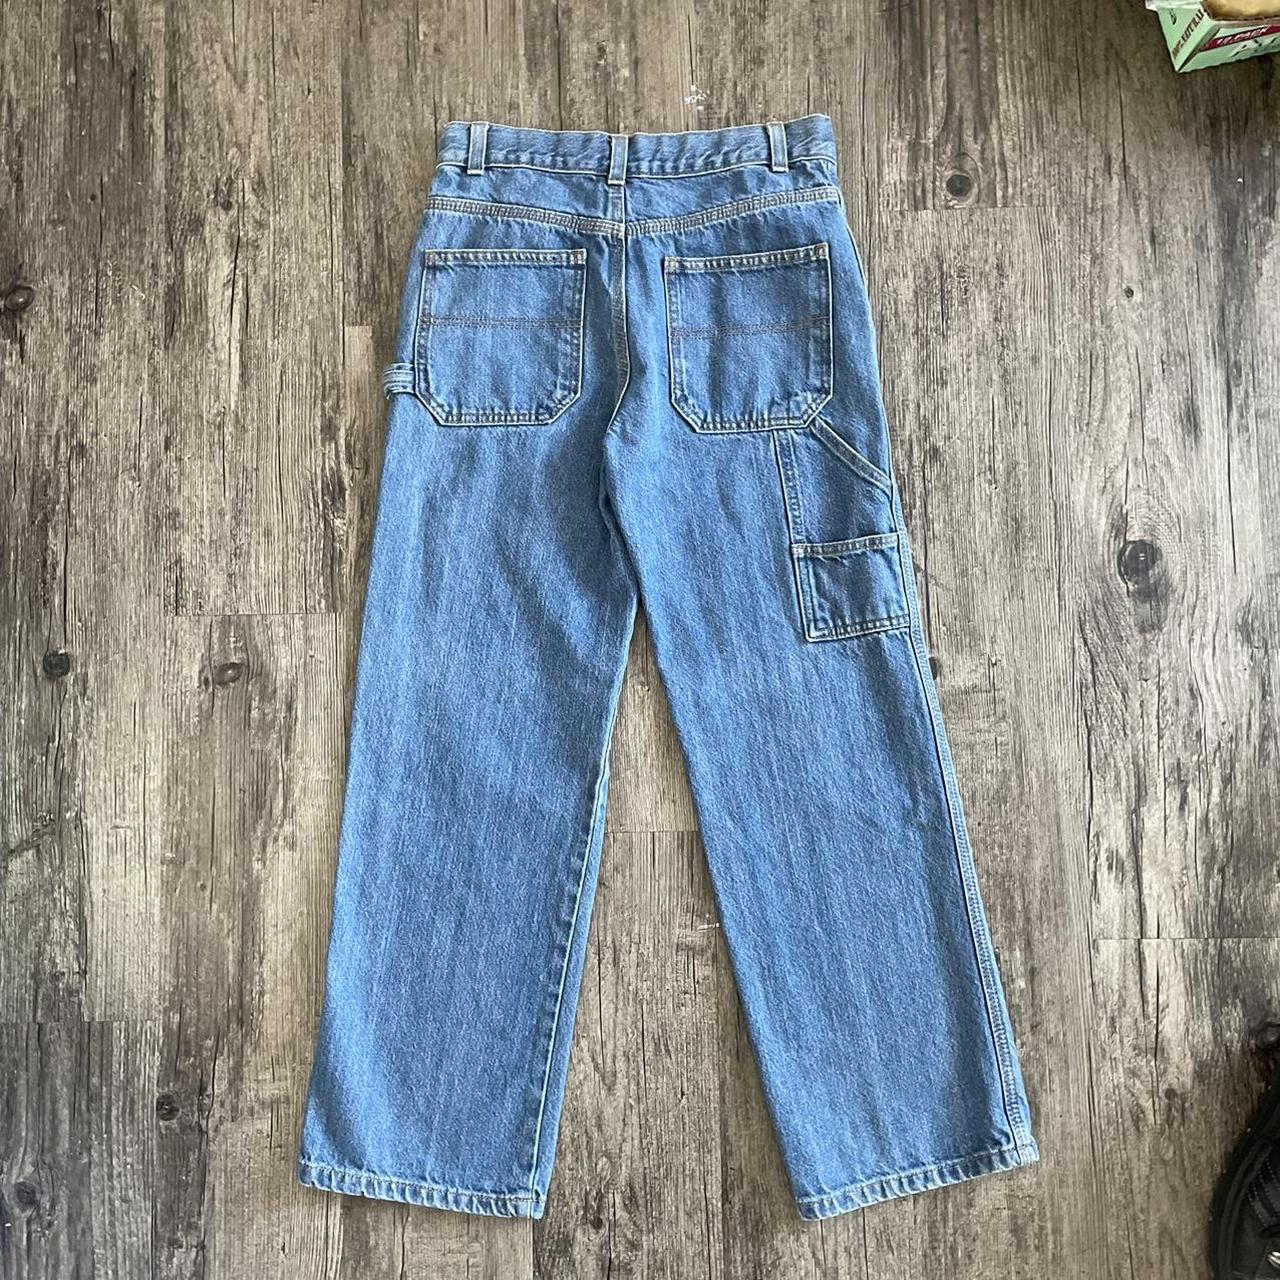 Y2k Cargos early 2000s carpenter jeans from faded... - Depop